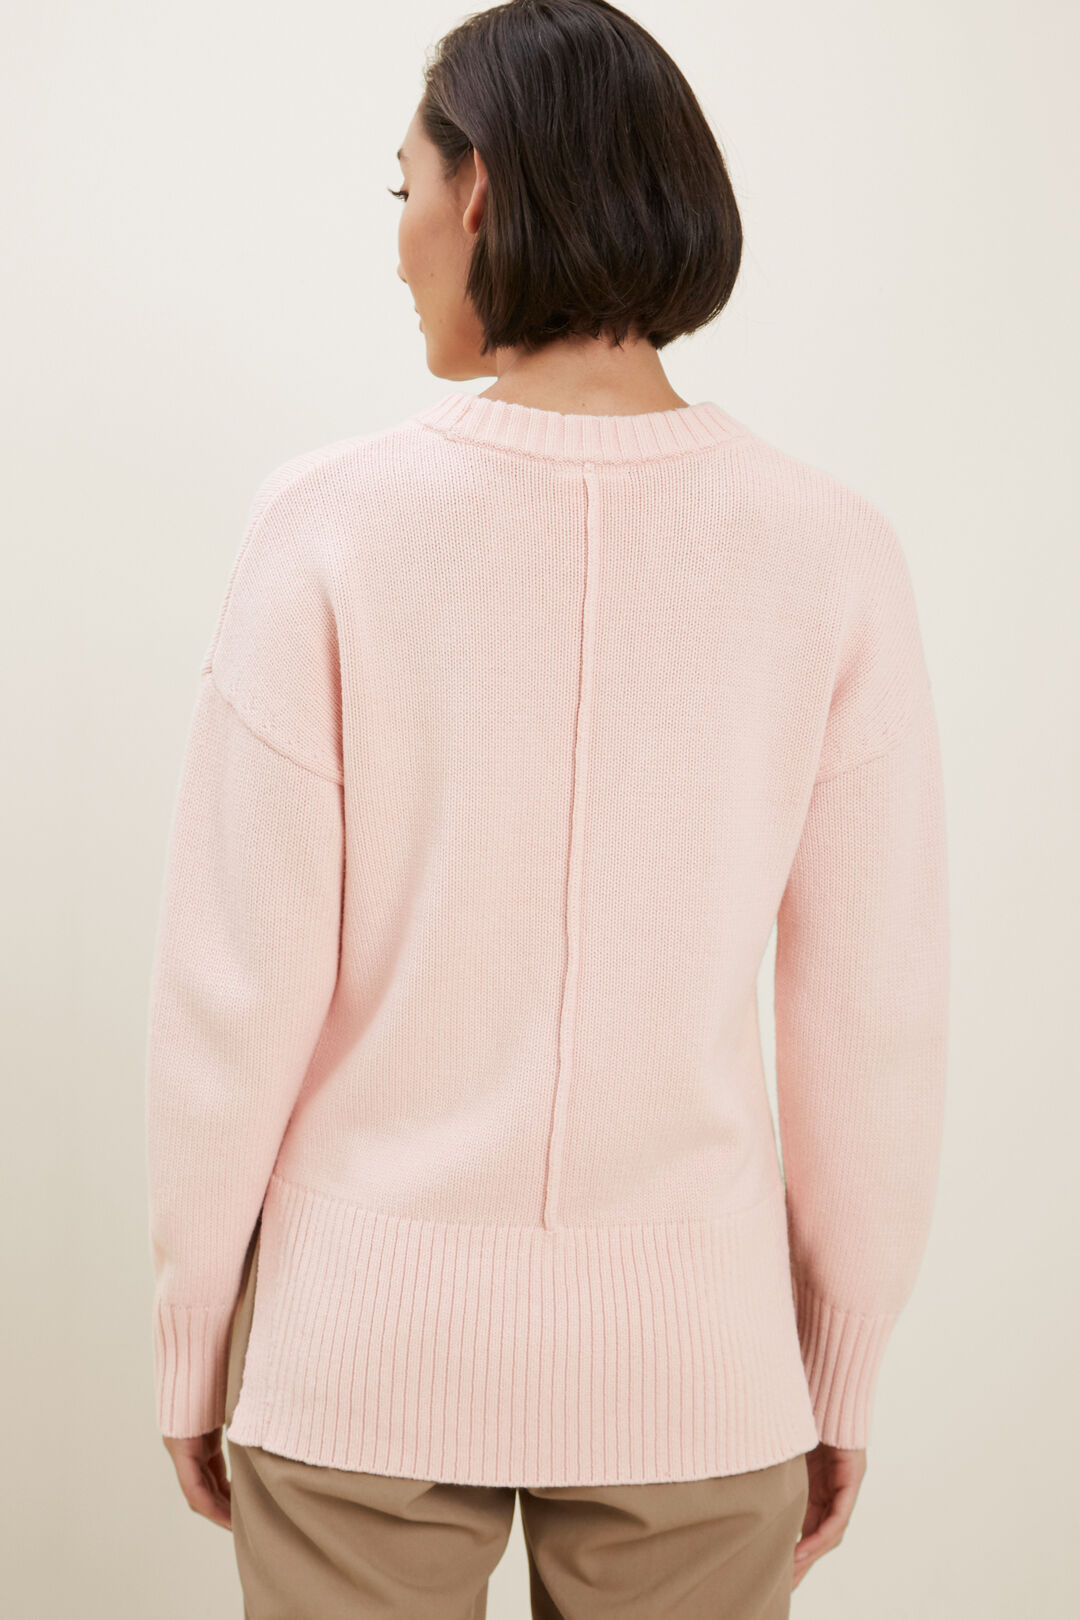 Relaxed Seam Front Sweater  Ash Pink  hi-res